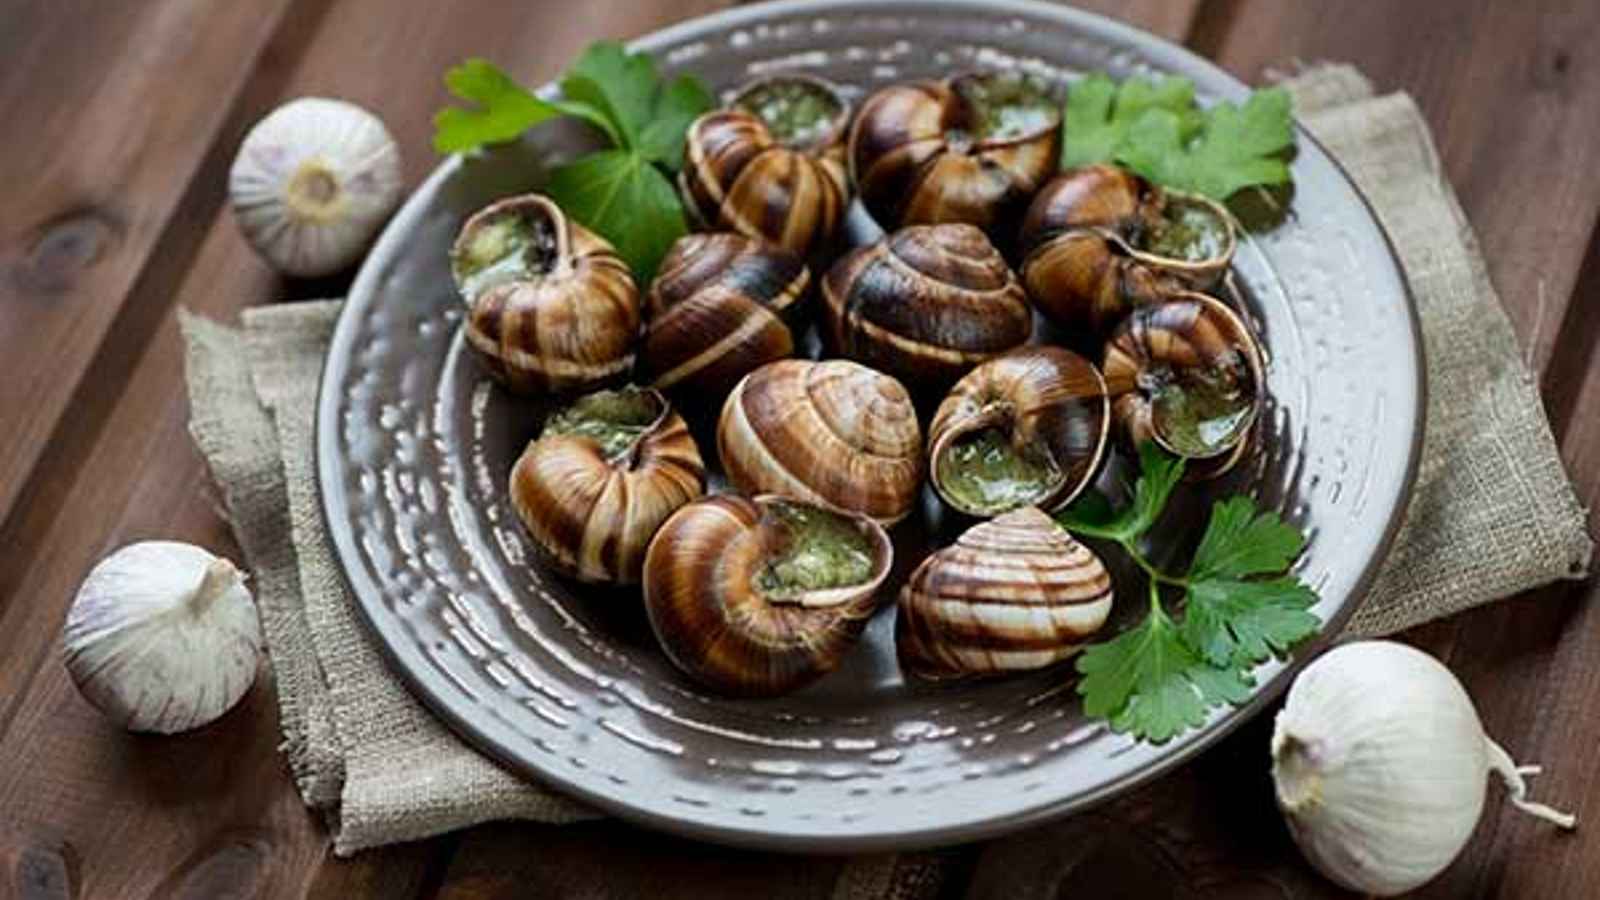 National Escargot Day 2023: Date, History, Facts about Escargot